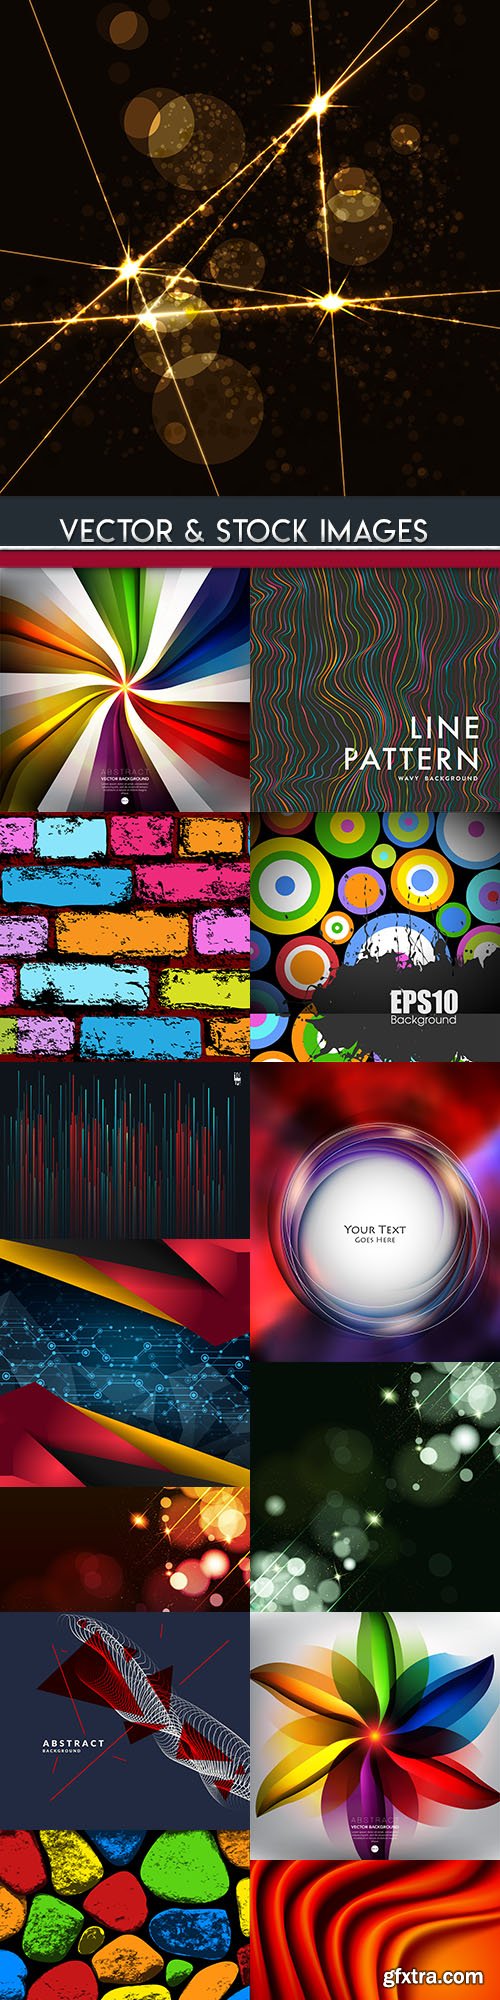 Modern abstract backgrounds decorative collection 25